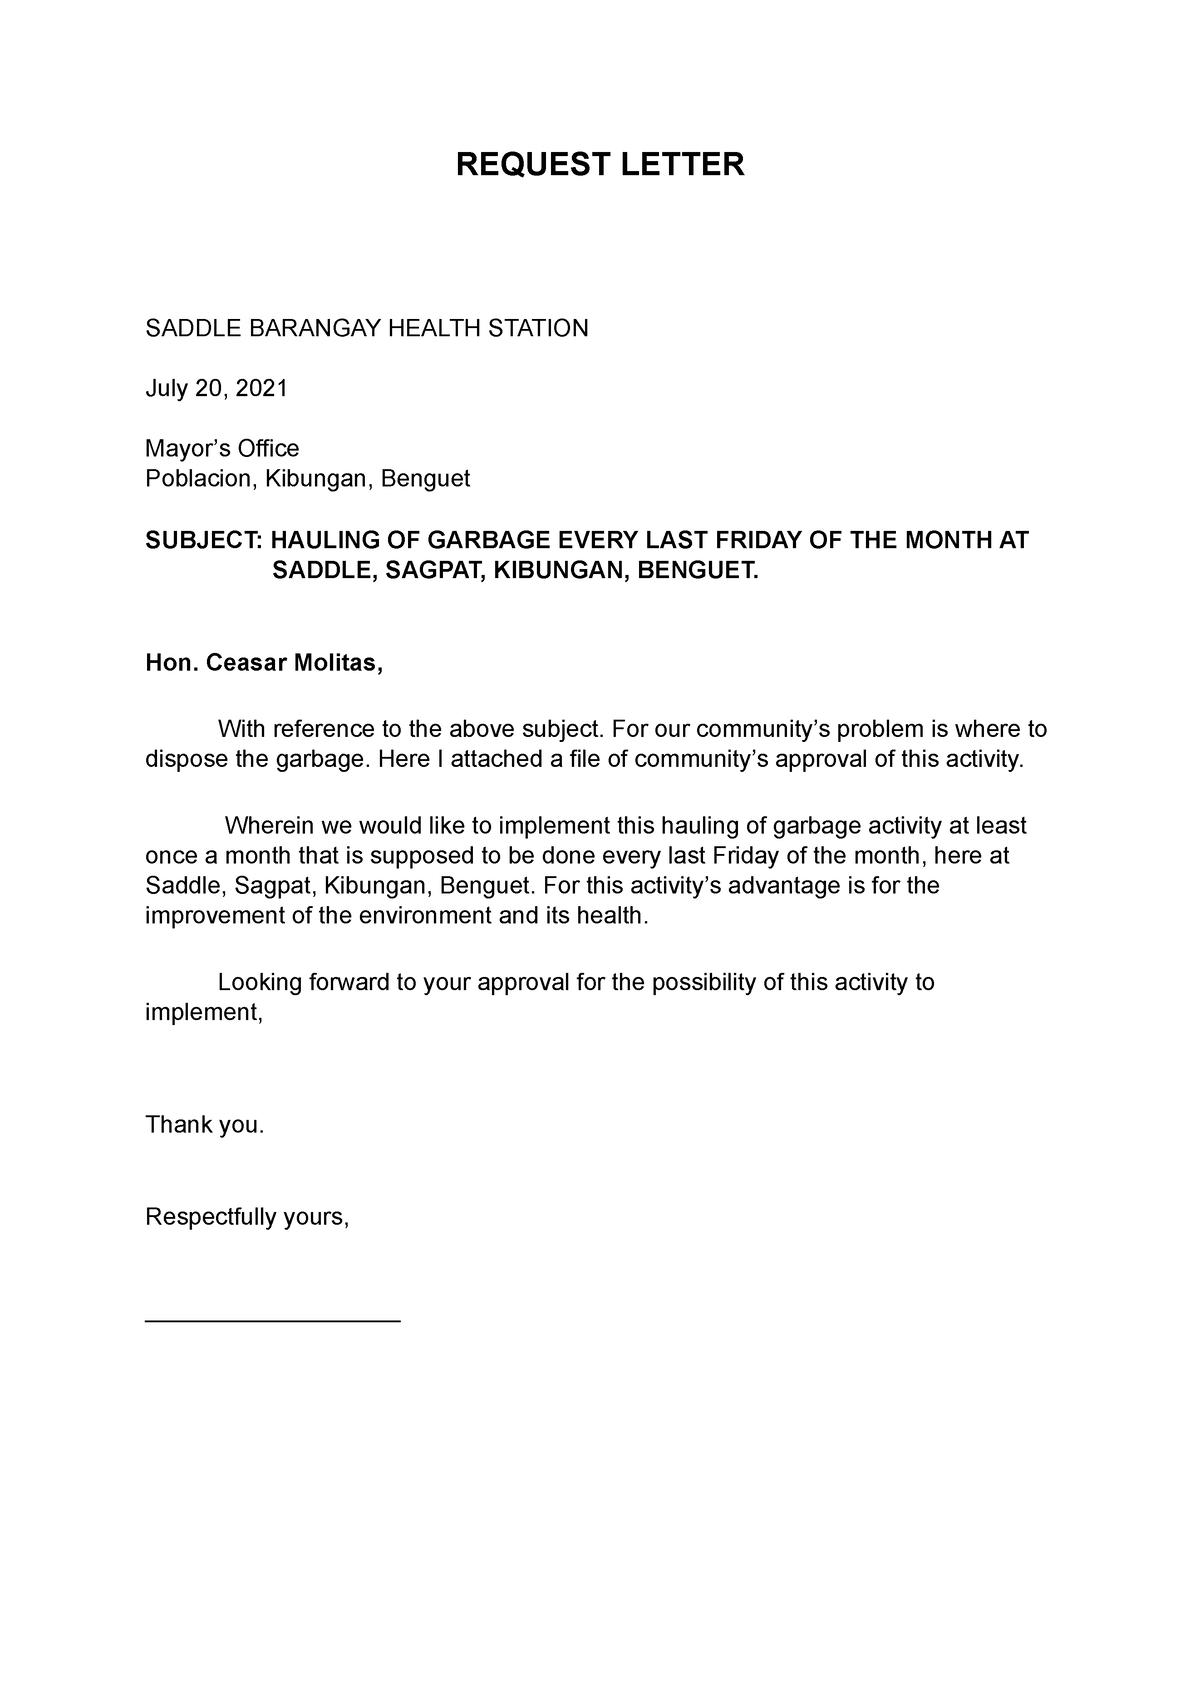 Request Letter Request Letter Saddle Barangay Health Station July Mayors Office